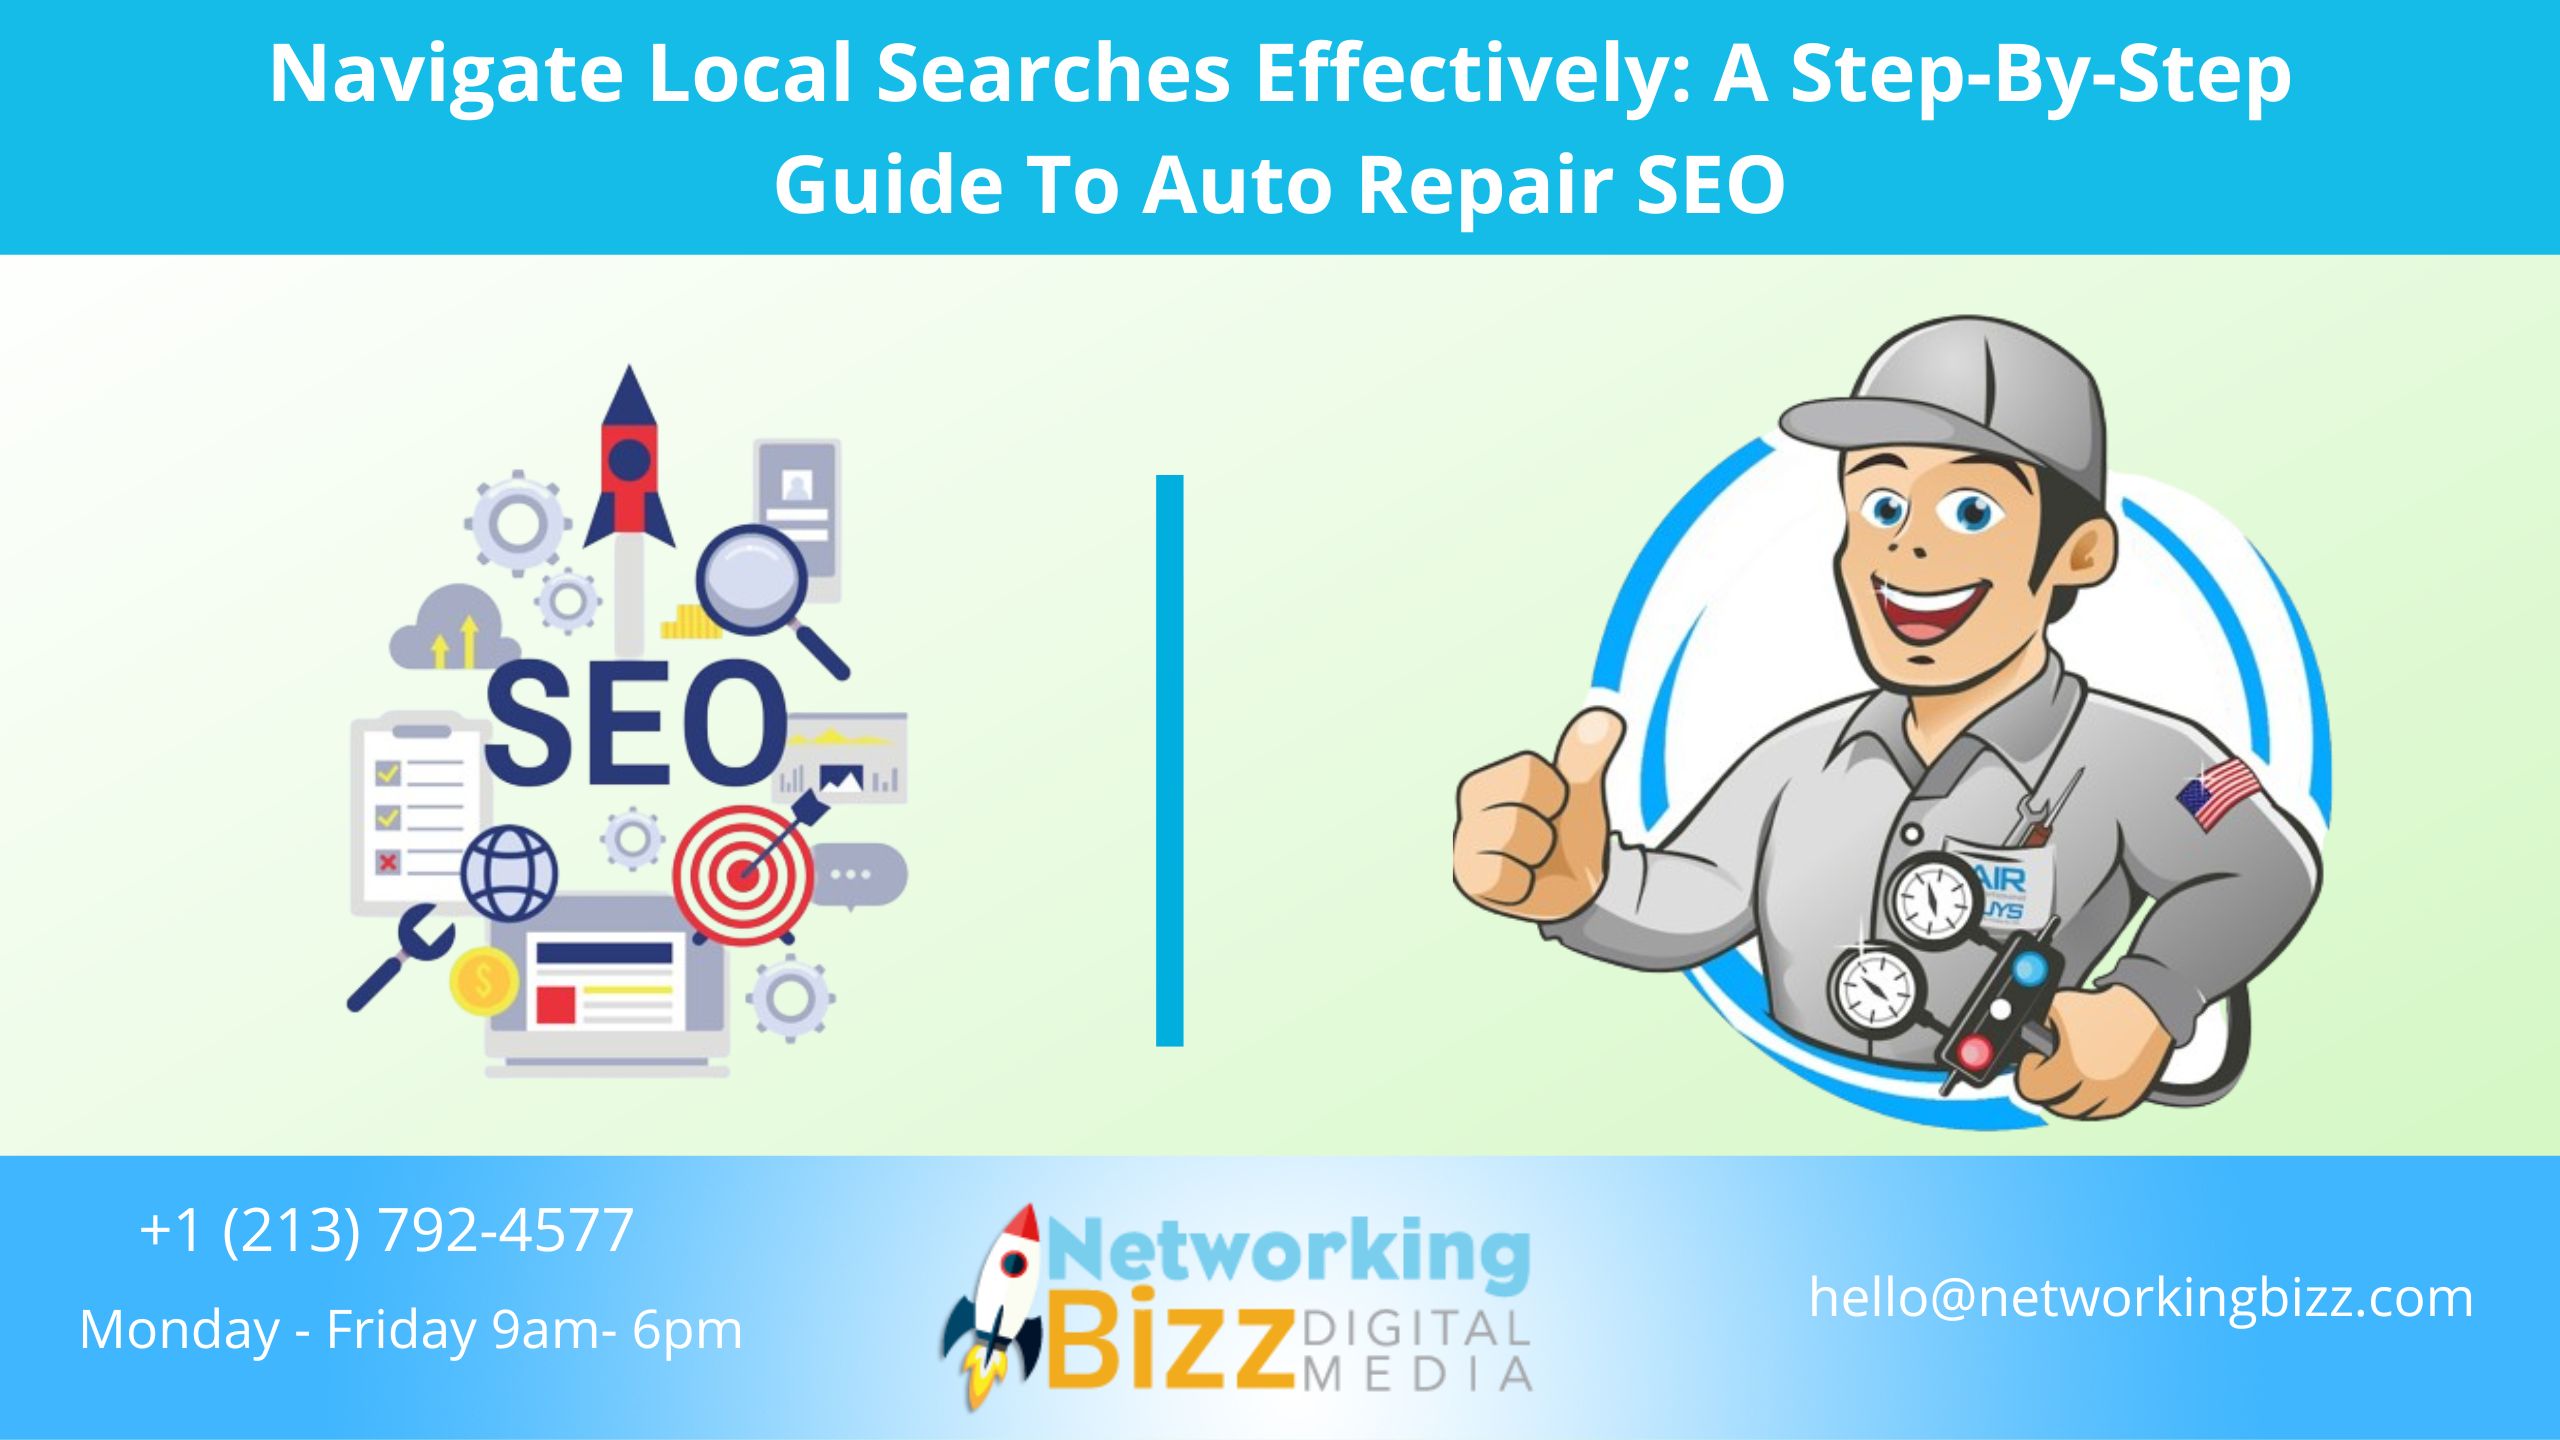 Navigate Local Searches Effectively: A Step-By-Step Guide To Auto Repair SEO